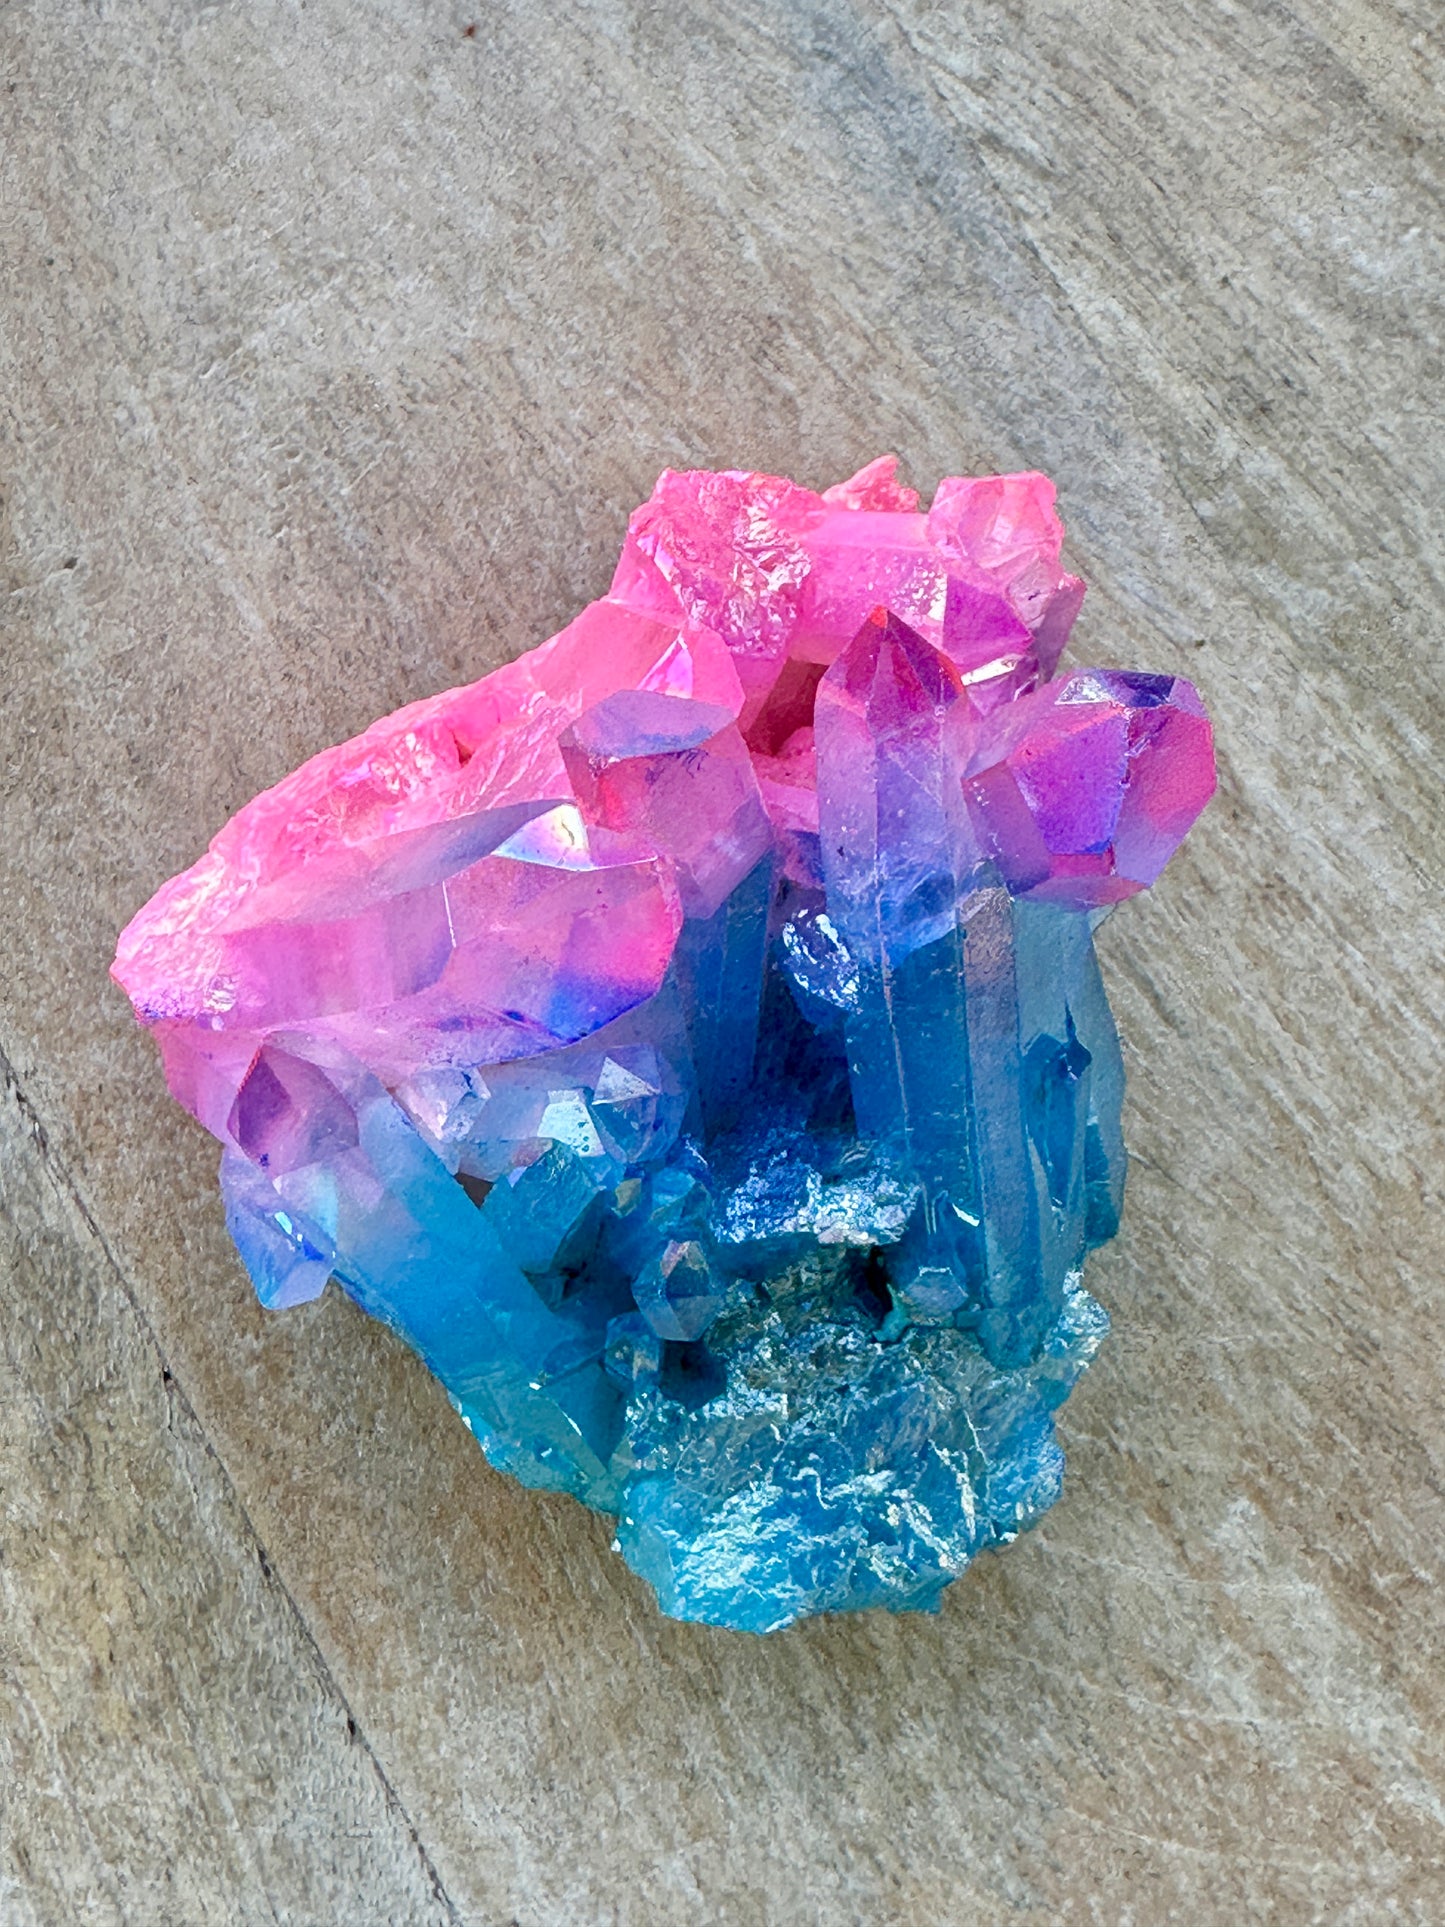 Radiant Aura Quartz Cluster - A Dazzling Display of Color and Energy, Ideal for Healing, Meditation, and Home Decor